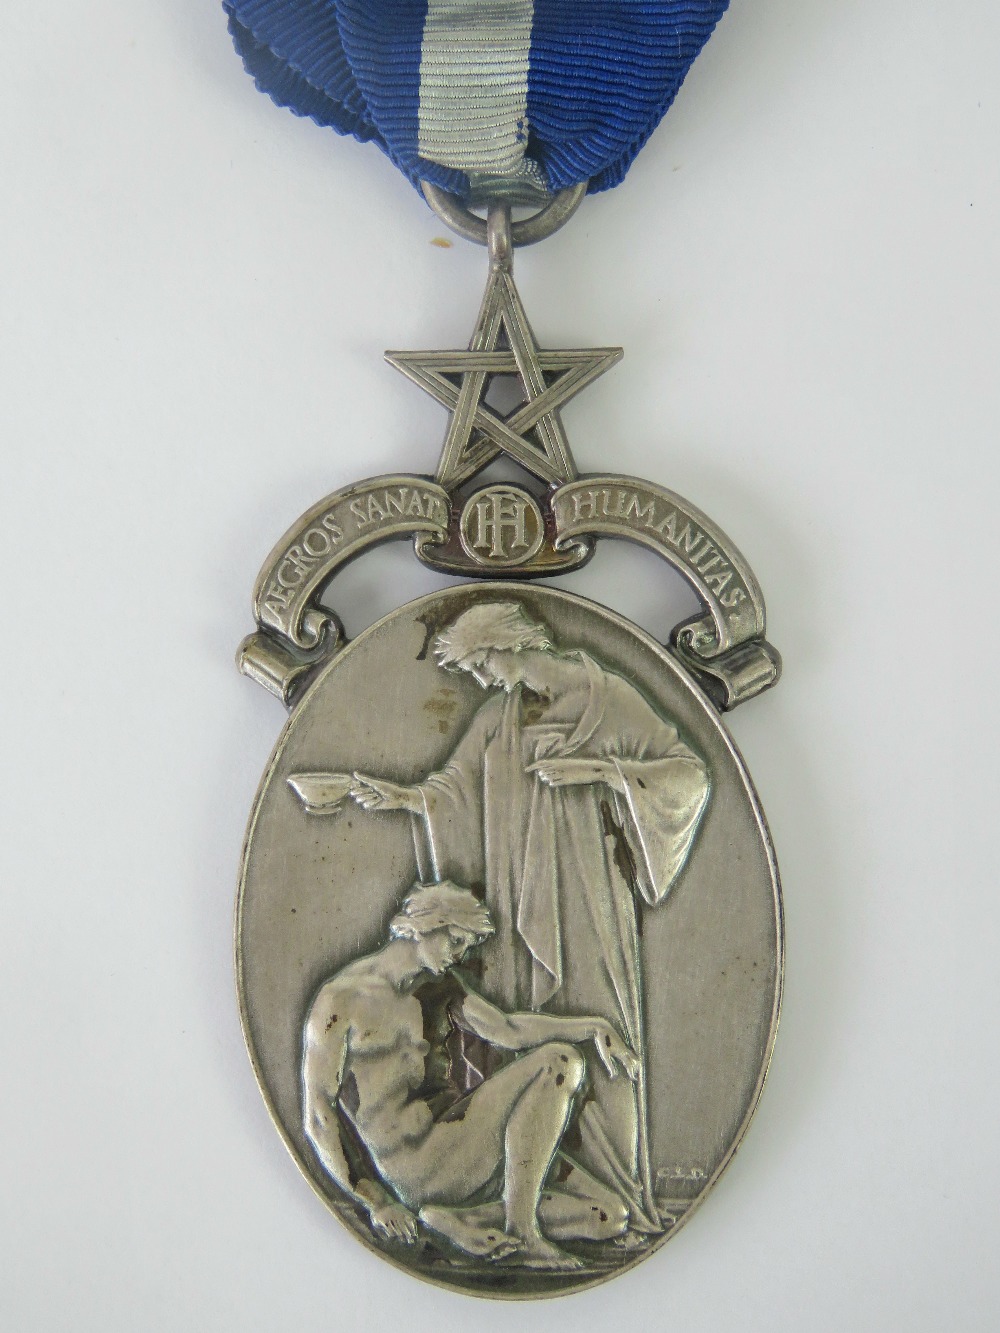 A HM silver Masonic medal presented to '